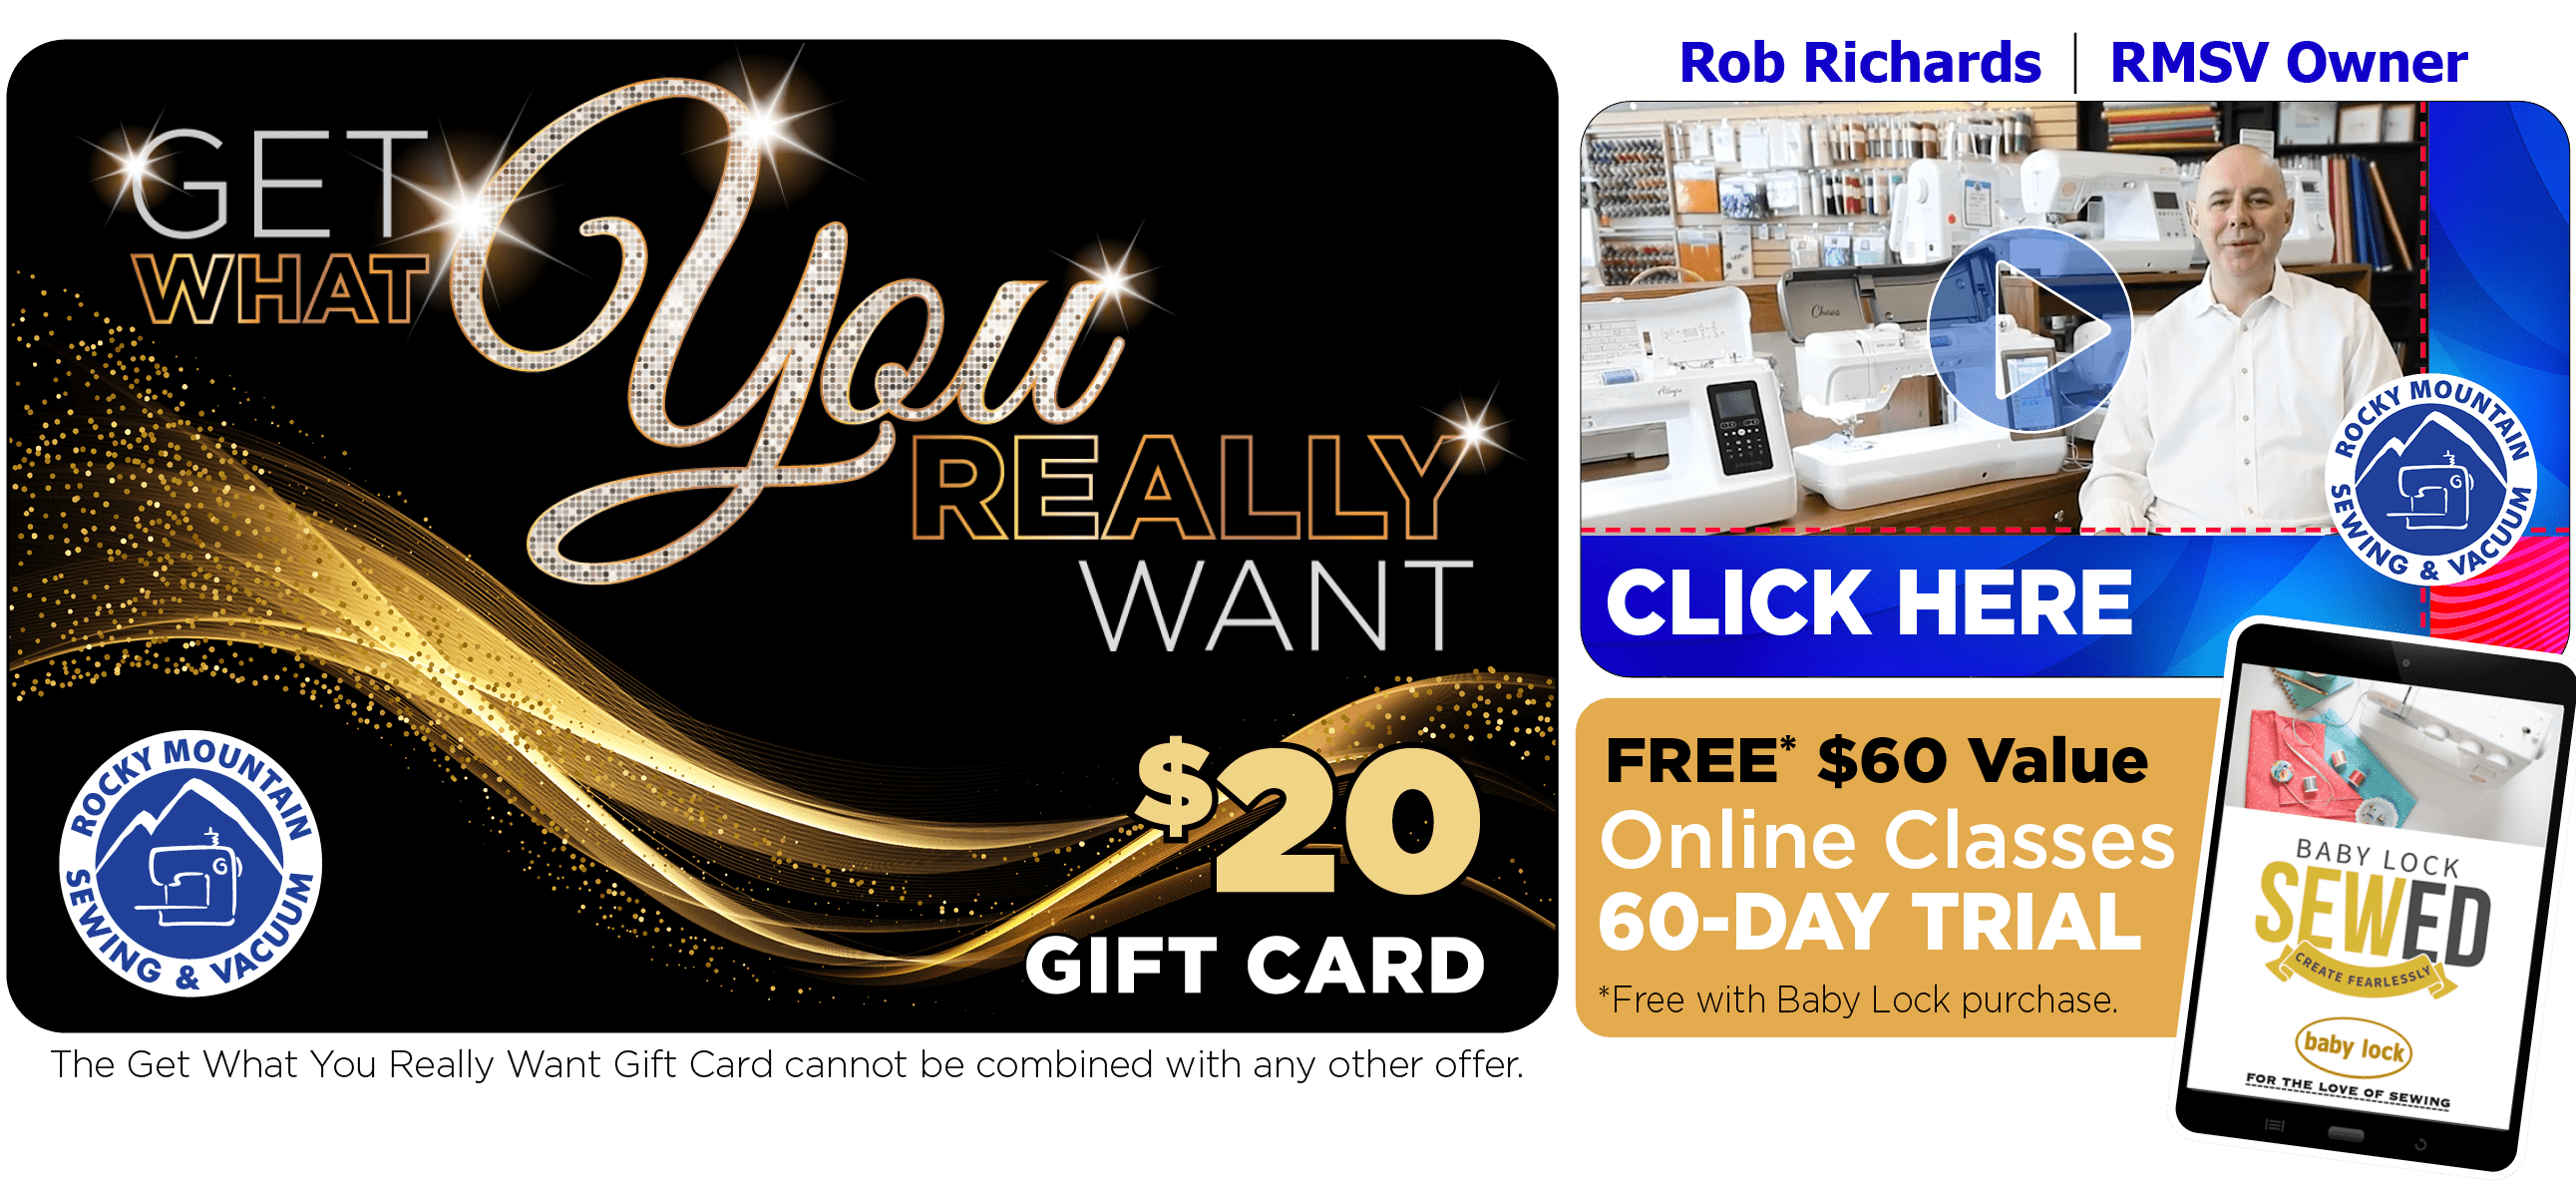 Get What You Really Want $20 Gift Card with Purchase